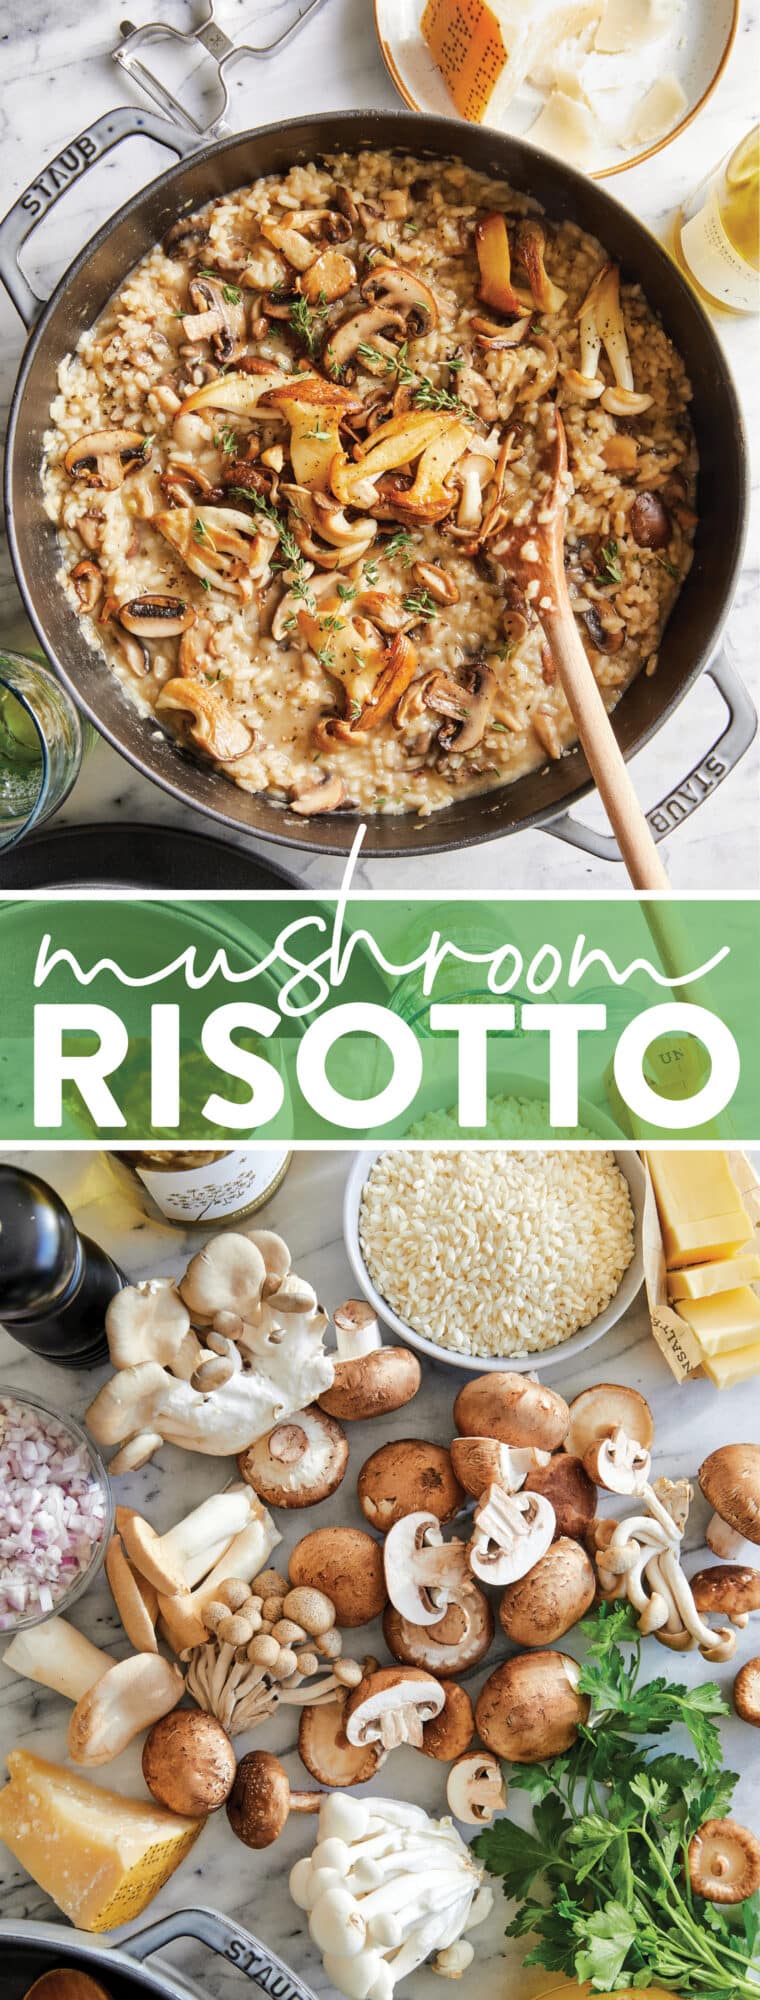 Mushroom Risotto - Nothing beats homemade risotto! So elegant, rich and oh so velvety-creamy, made with white wine, thyme, and fresh Parmesan.